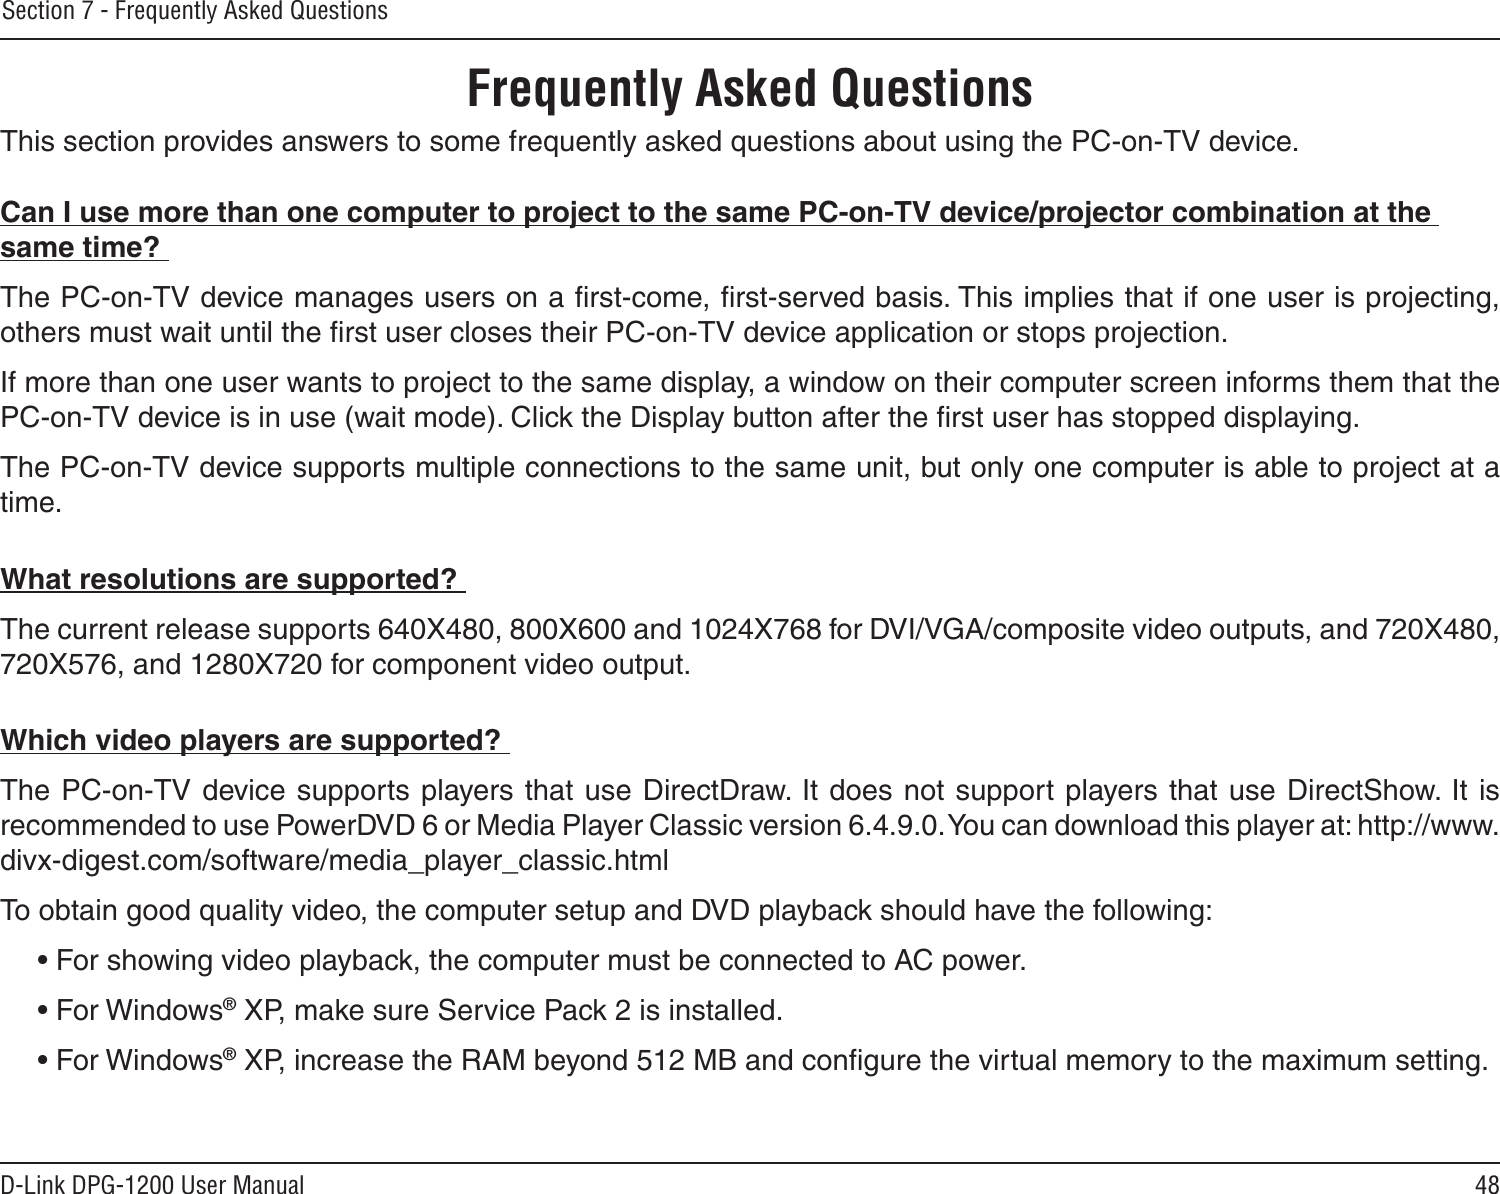 48D-Link DPG-1200 User ManualSection 7 - Frequently Asked QuestionsThis section provides answers to some frequently asked questions about using the PC-on-TV device.Can I use more than one computer to project to the same PC-on-TV device/projector combination at the same time? The PC-on-TV device manages users on a ﬁrst-come, ﬁrst-served basis. This implies that if one user is projecting, others must wait until the ﬁrst user closes their PC-on-TV device application or stops projection. If more than one user wants to project to the same display, a window on their computer screen informs them that the PC-on-TV device is in use (wait mode). Click the Display button after the ﬁrst user has stopped displaying. The PC-on-TV device supports multiple connections to the same unit, but only one computer is able to project at a time.What resolutions are supported? The current release supports 640X480, 800X600 and 1024X768 for DVI/VGA/composite video outputs, and 720X480, 720X576, and 1280X720 for component video output.Which video players are supported? The PC-on-TV  device supports players that use DirectDraw. It  does not support  players that use DirectShow. It is recommended to use PowerDVD 6 or Media Player Classic version 6.4.9.0. You can download this player at: http://www.divx-digest.com/software/media_player_classic.htmlTo obtain good quality video, the computer setup and DVD playback should have the following:• For showing video playback, the computer must be connected to AC power.• For Windows® XP, make sure Service Pack 2 is installed.• For Windows® XP, increase the RAM beyond 512 MB and conﬁgure the virtual memory to the maximum setting.Frequently Asked Questions